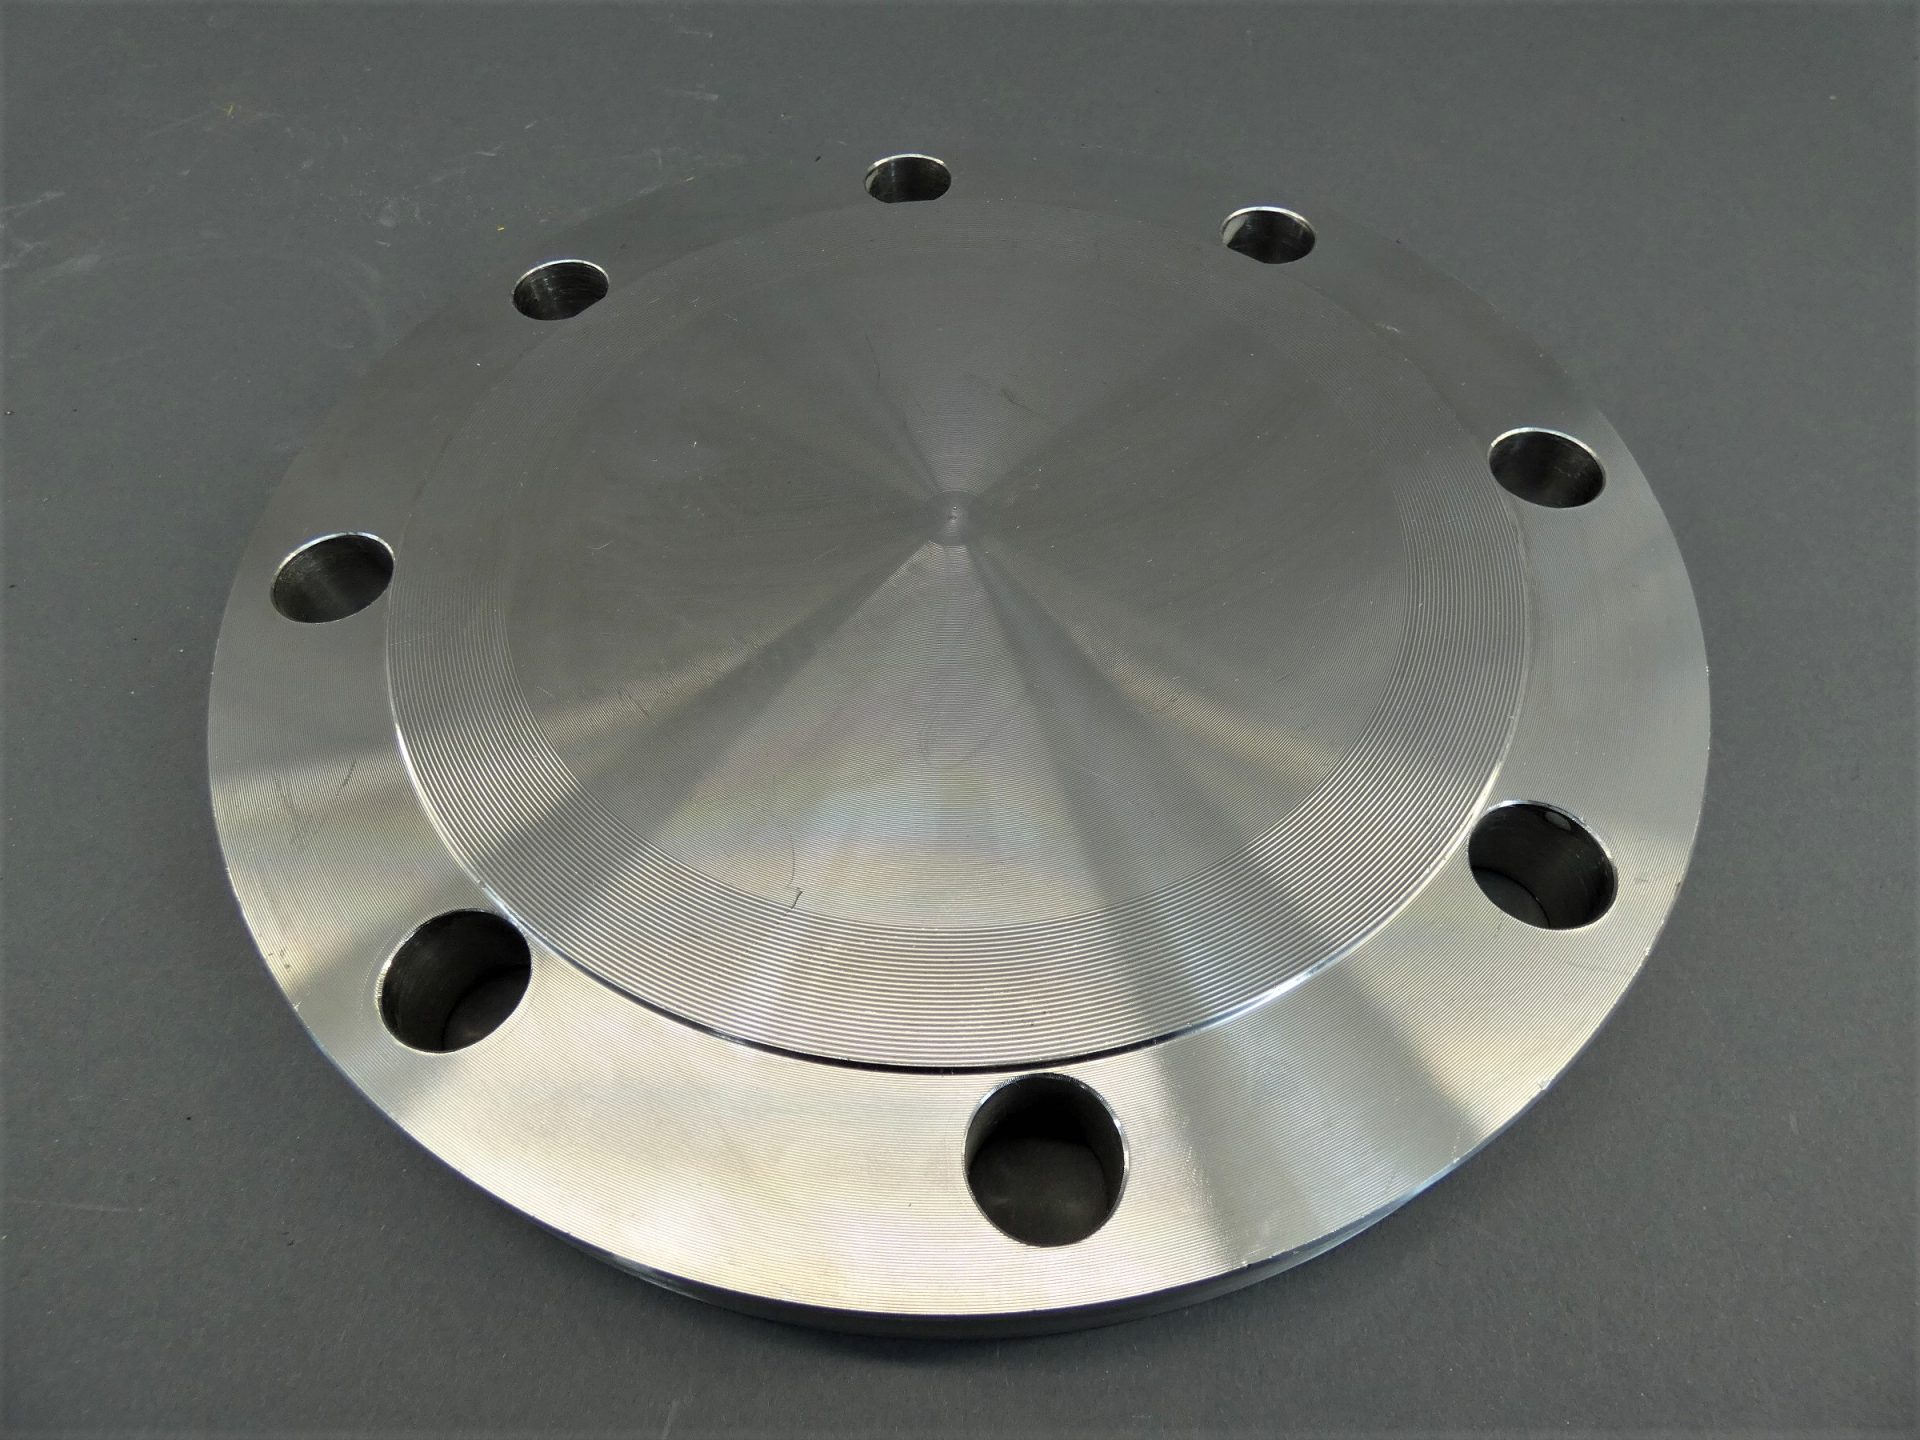 6″ Ansi Blind Flange B165 A182 Raised Face Rf Stainless Steel 150 316316l Ss Gpm Surplus 1623